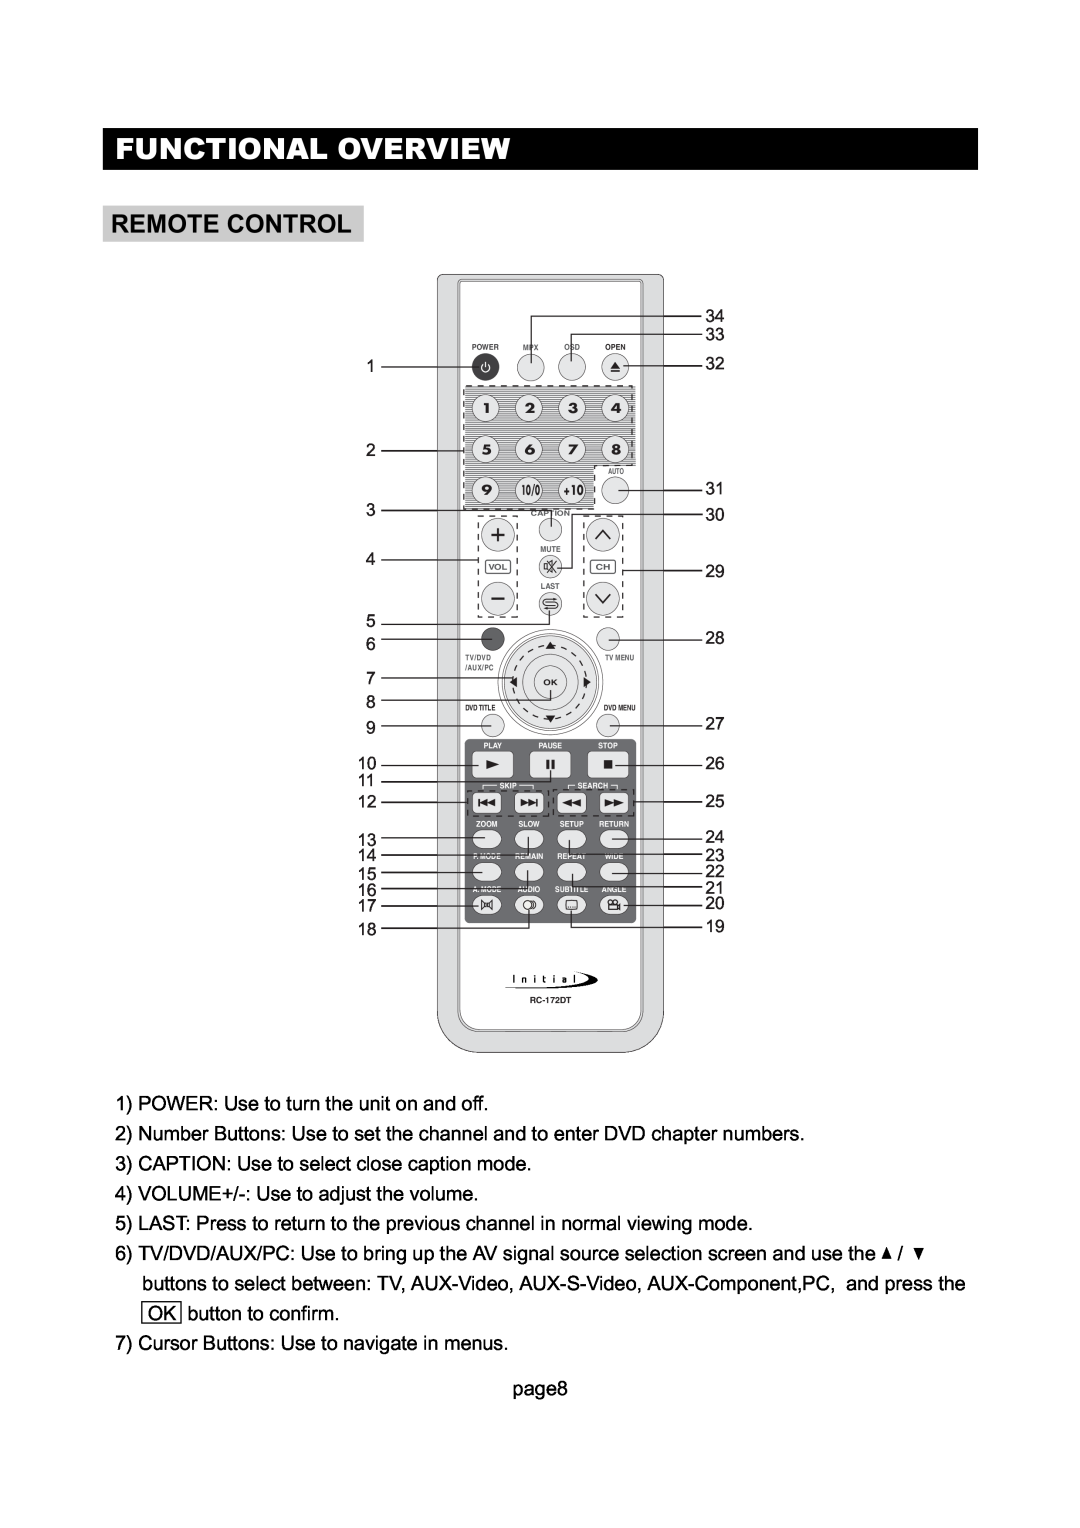 Initial DTV-172A manual Remote Control, Functional Overview 